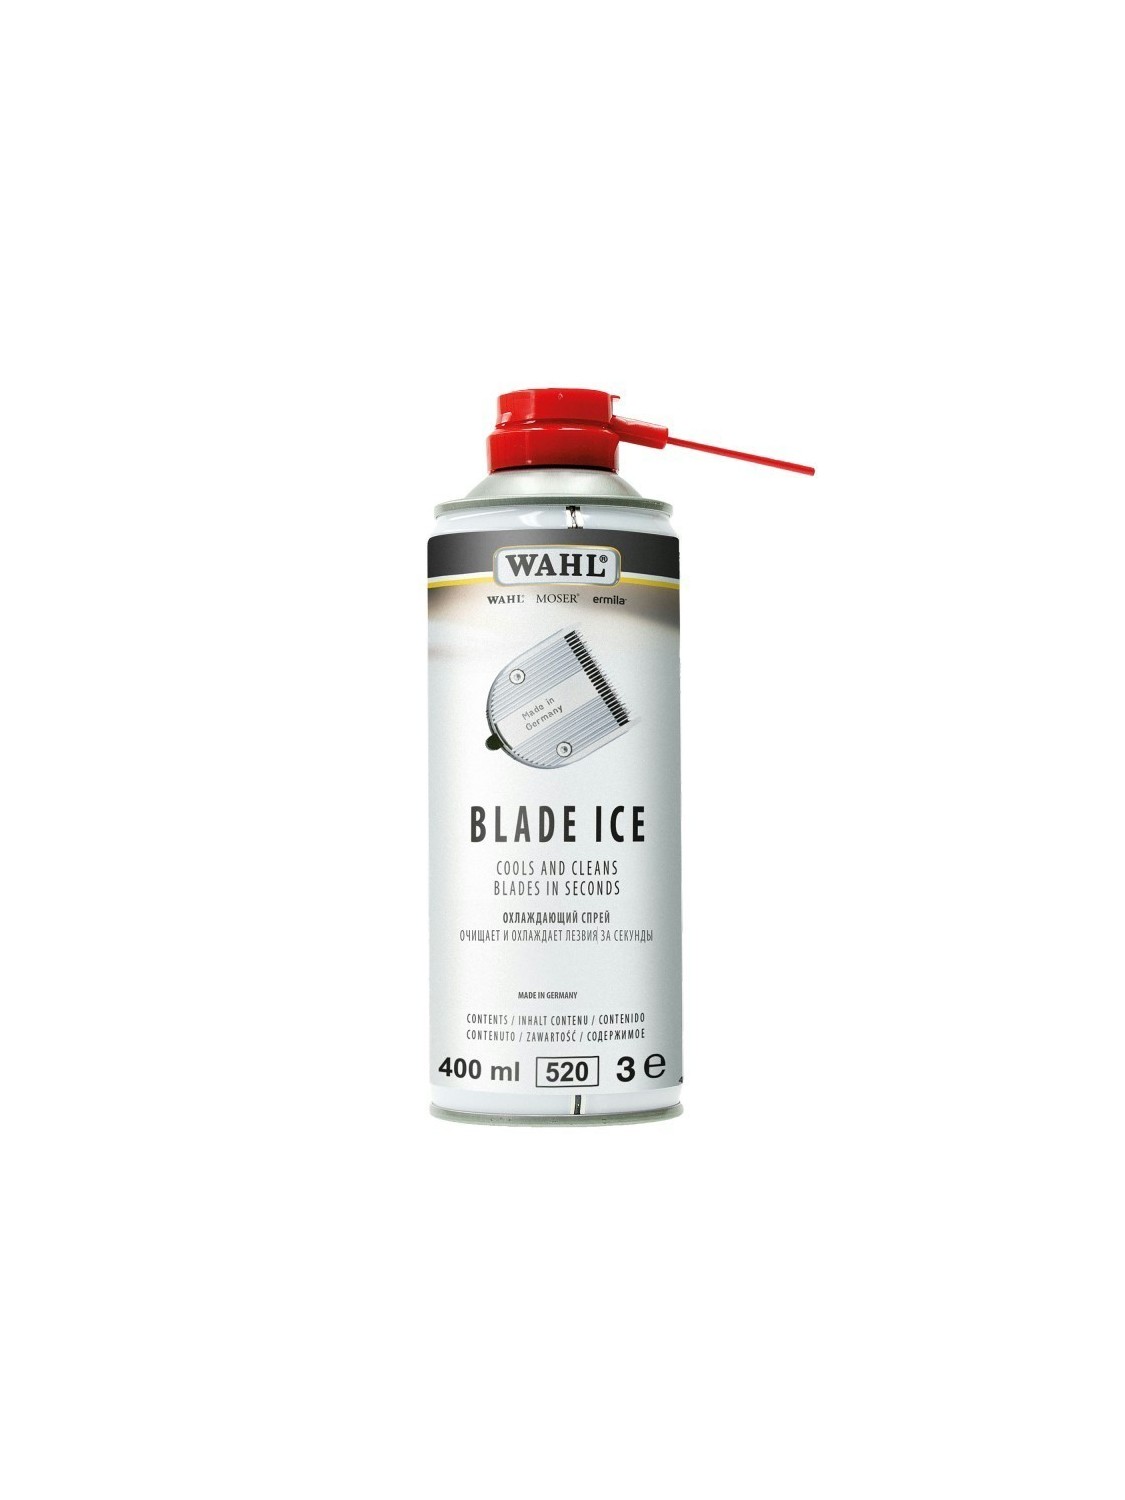 SPRAY D'HUILE POUR TONDEUSE WAHL " BLADE ICE "